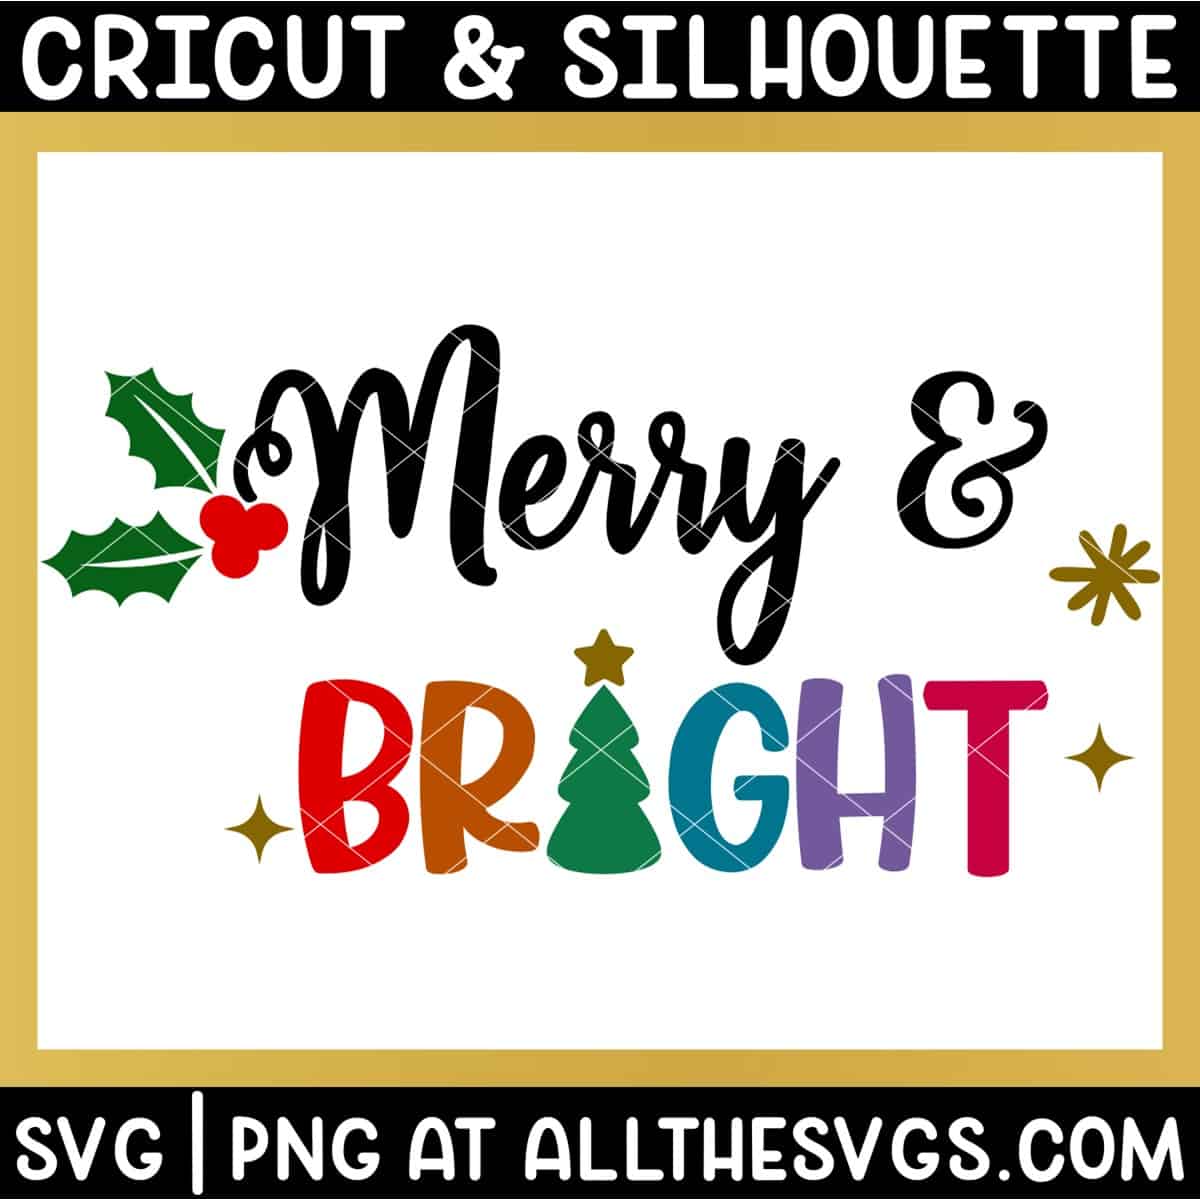 merry and bright svg file with holly, christmas tree, and stars.